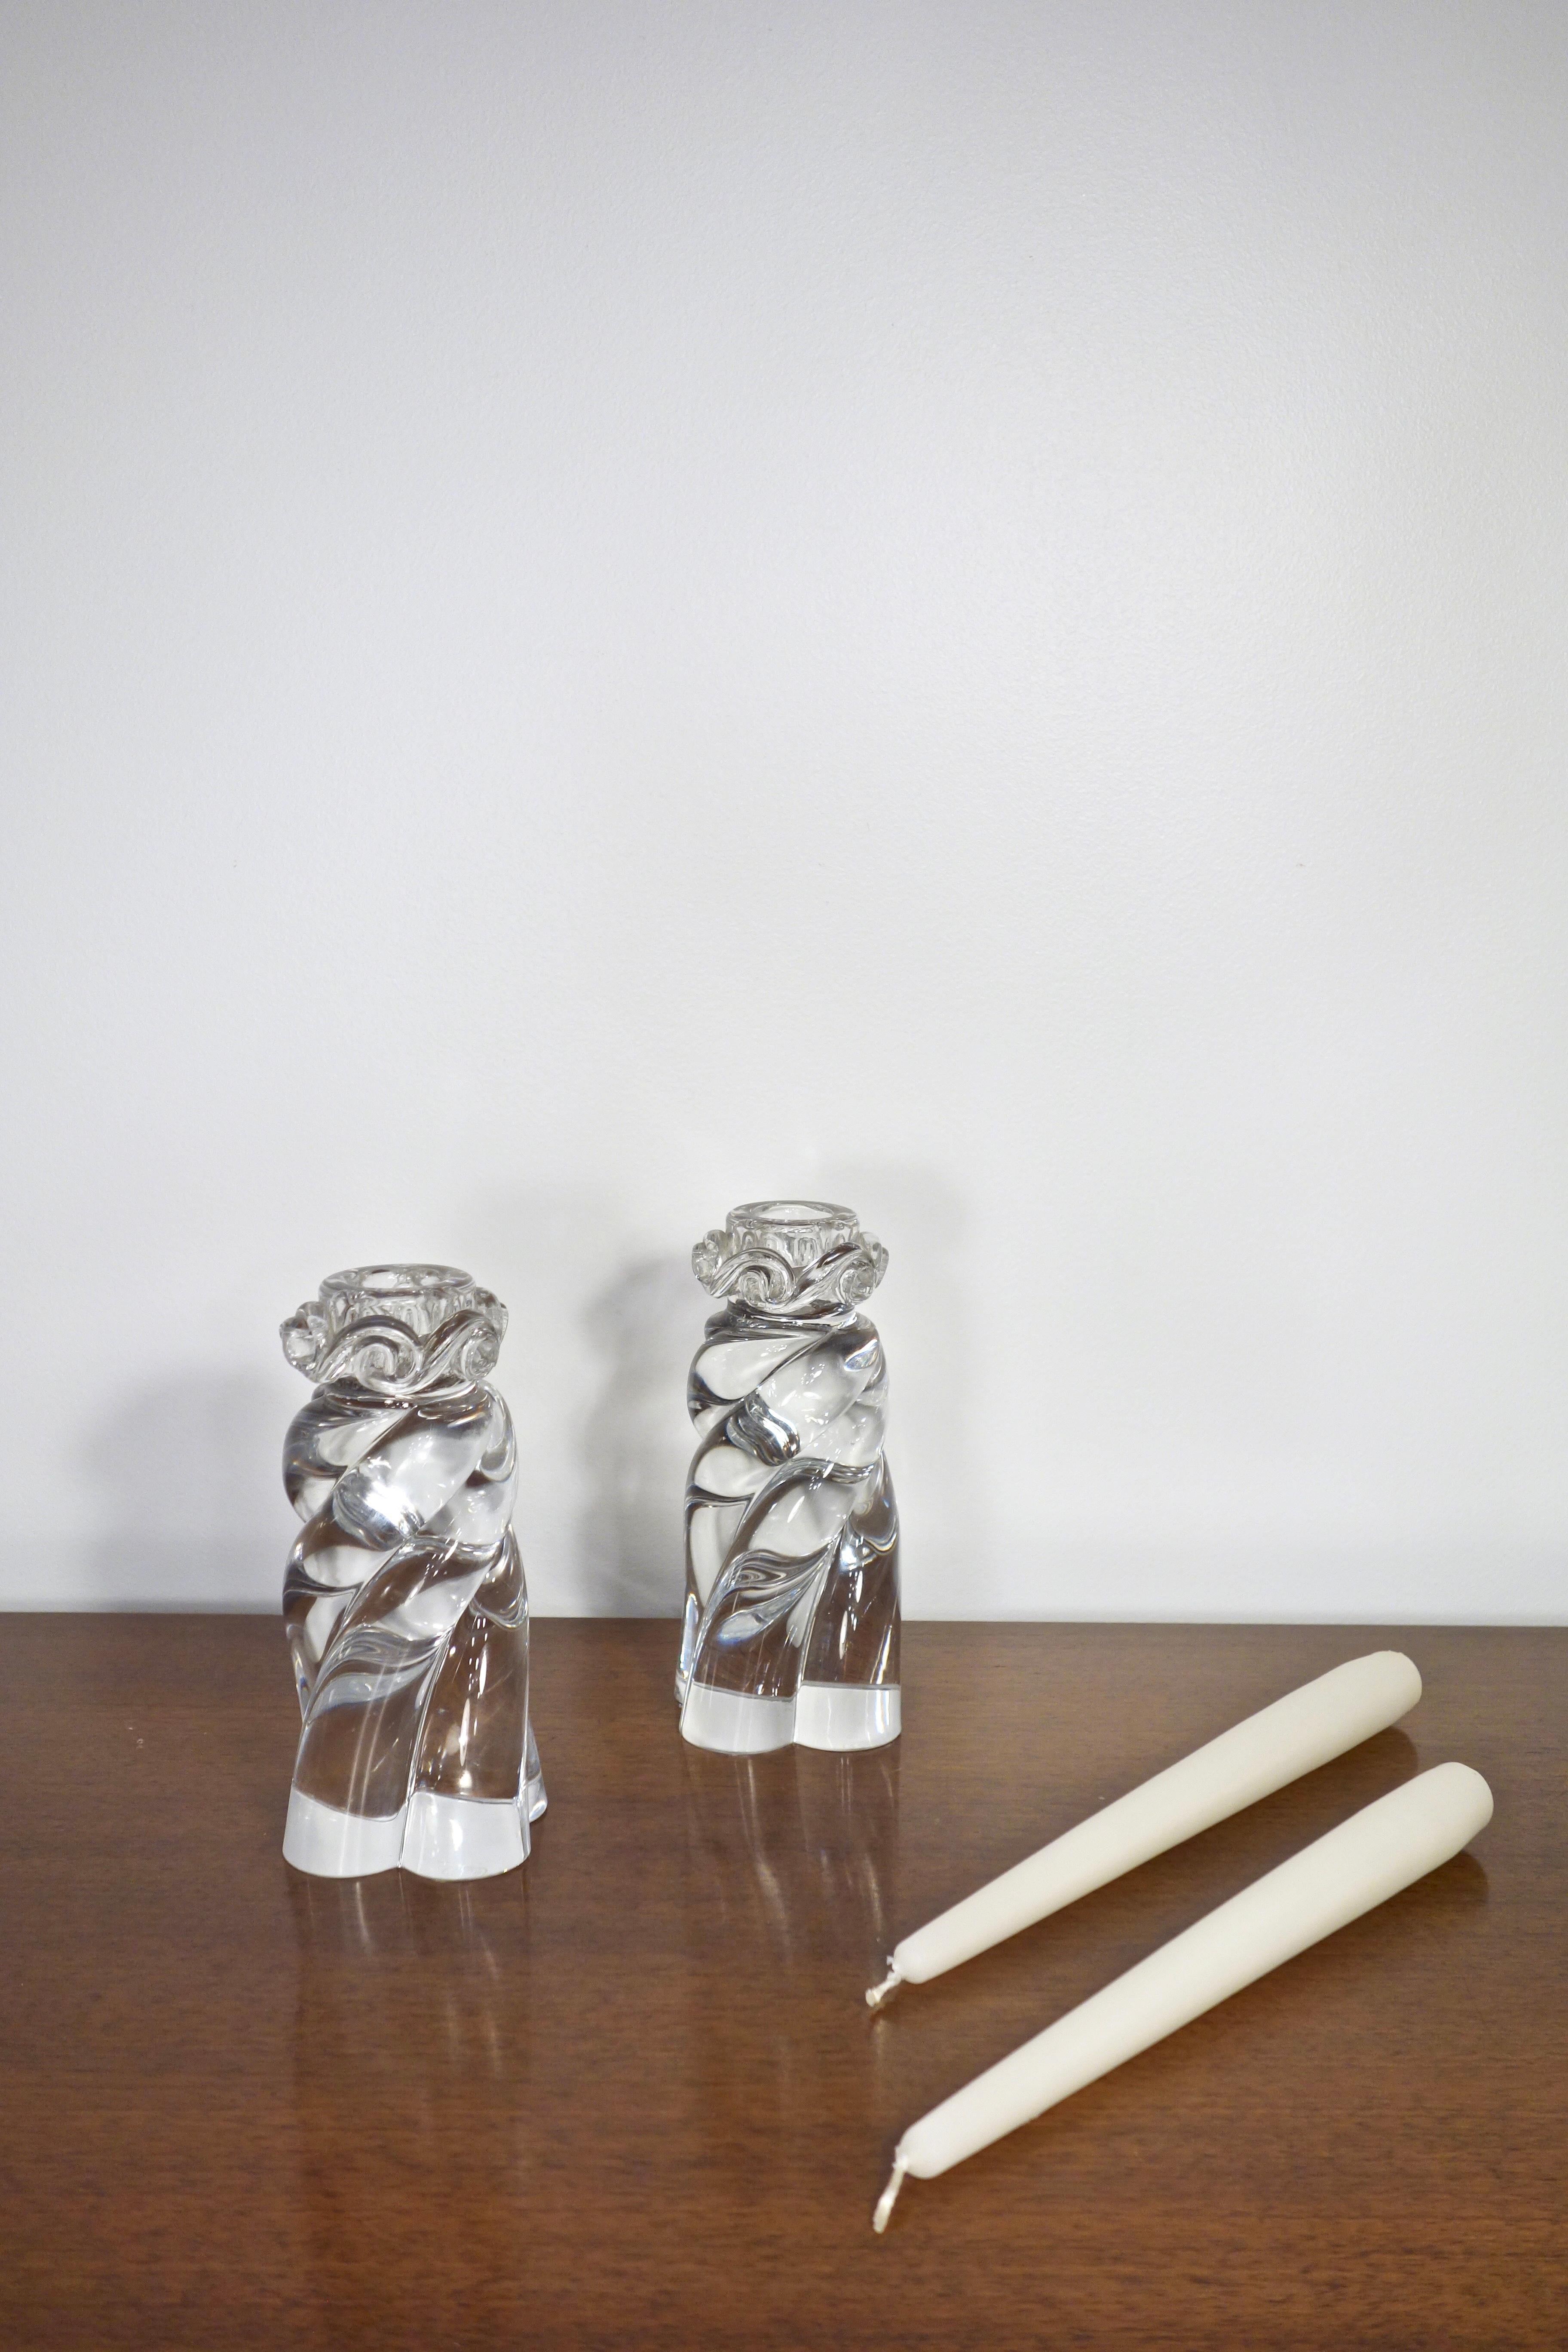 20th Century French Pair of Aladdin Crystal Candlesticks by Baccarat 1960's For Sale